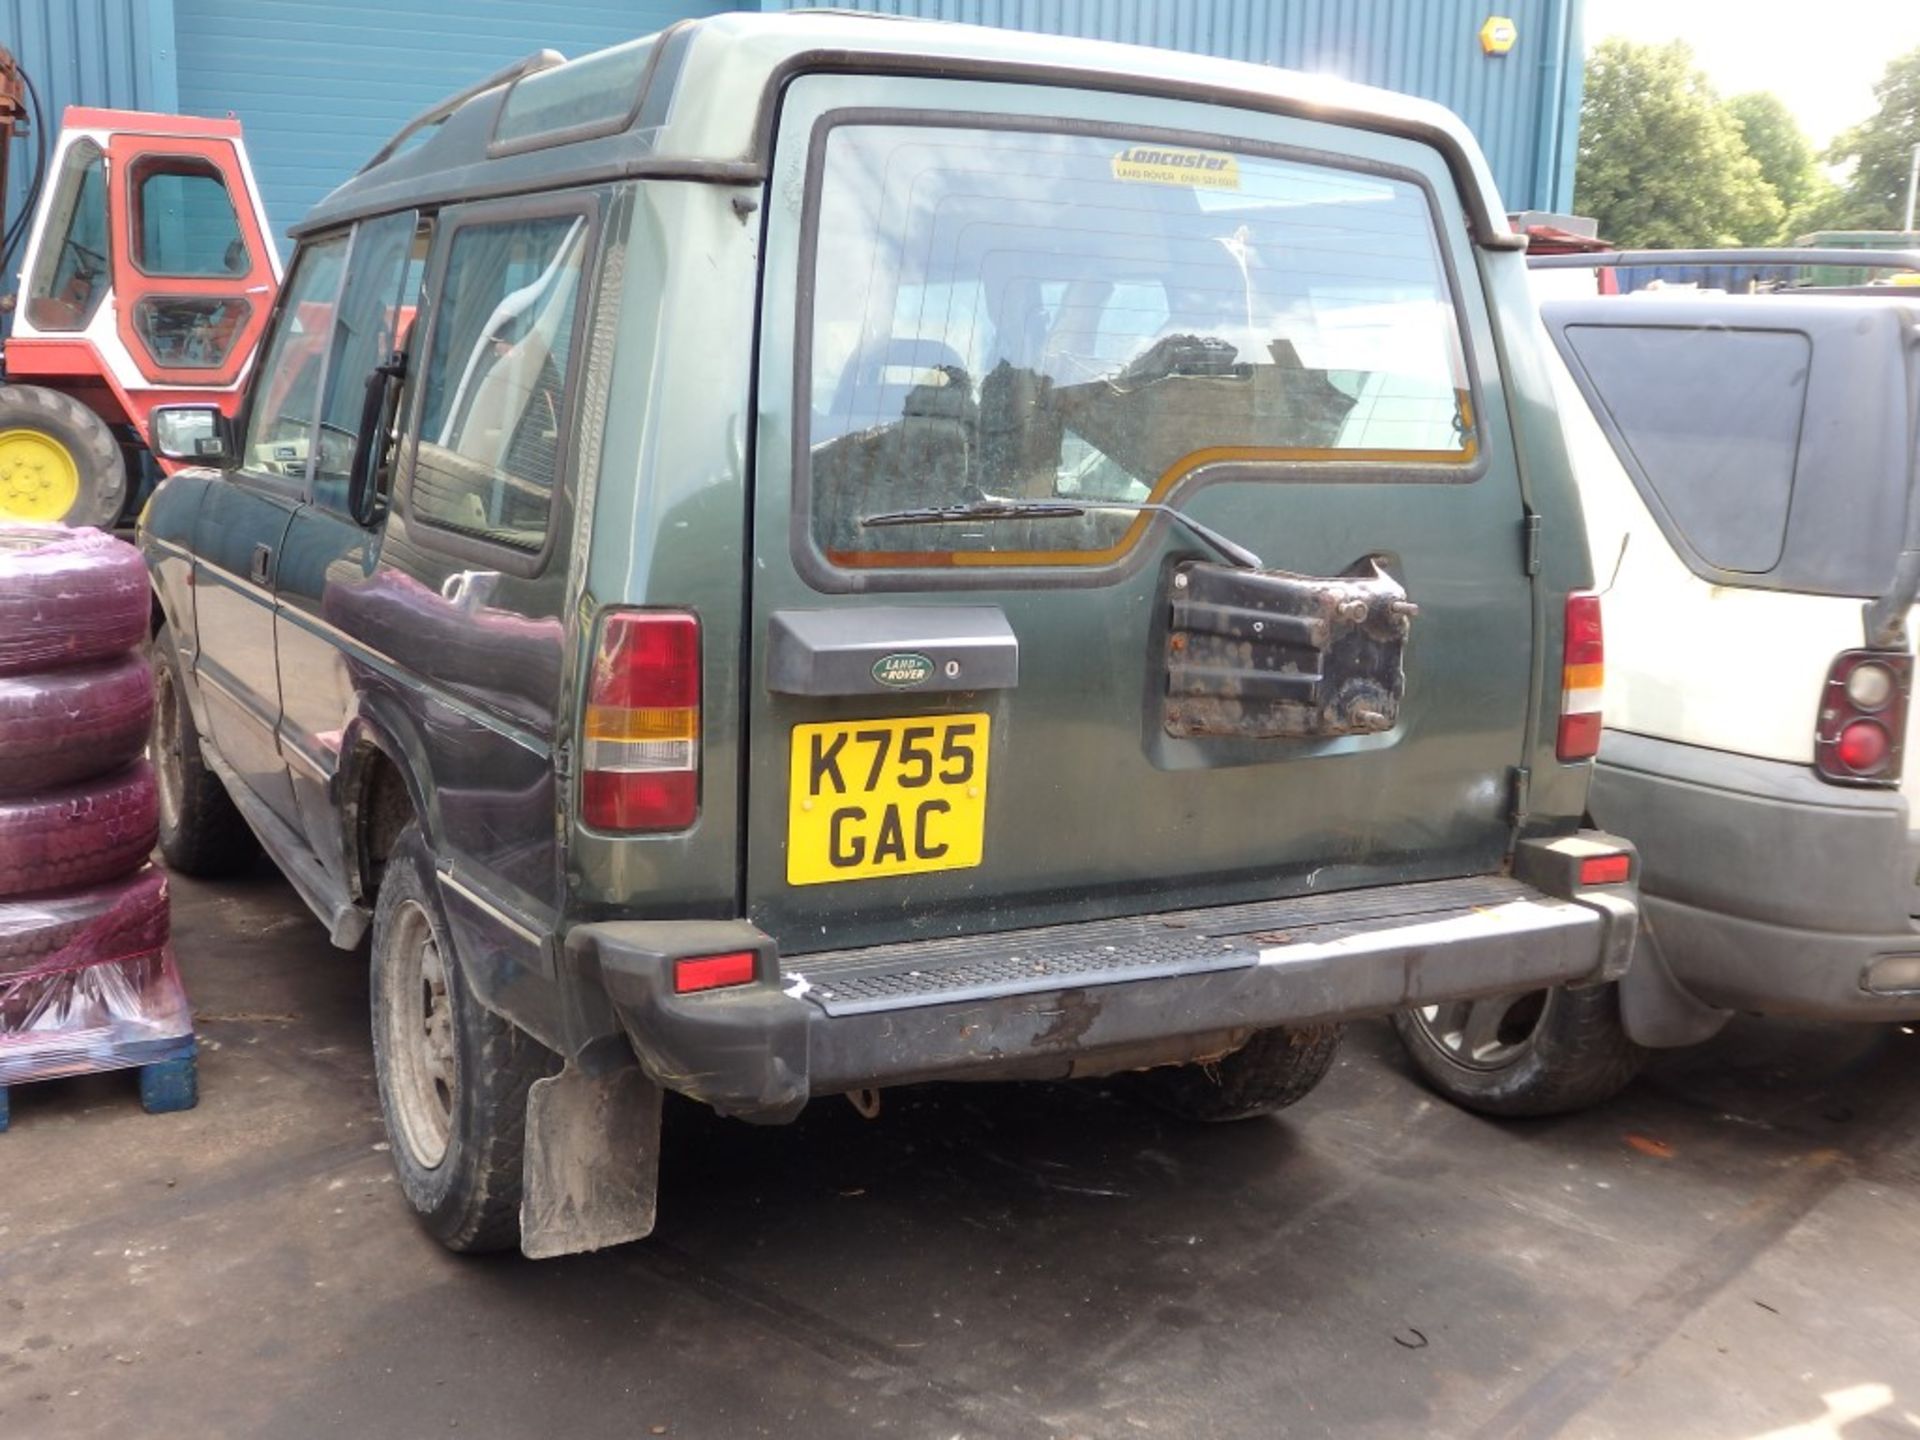 1 x Land Rover Discovery - Registration K755 GAC - Key In Ignition - Been Standing In Yard For 7 - Image 12 of 18